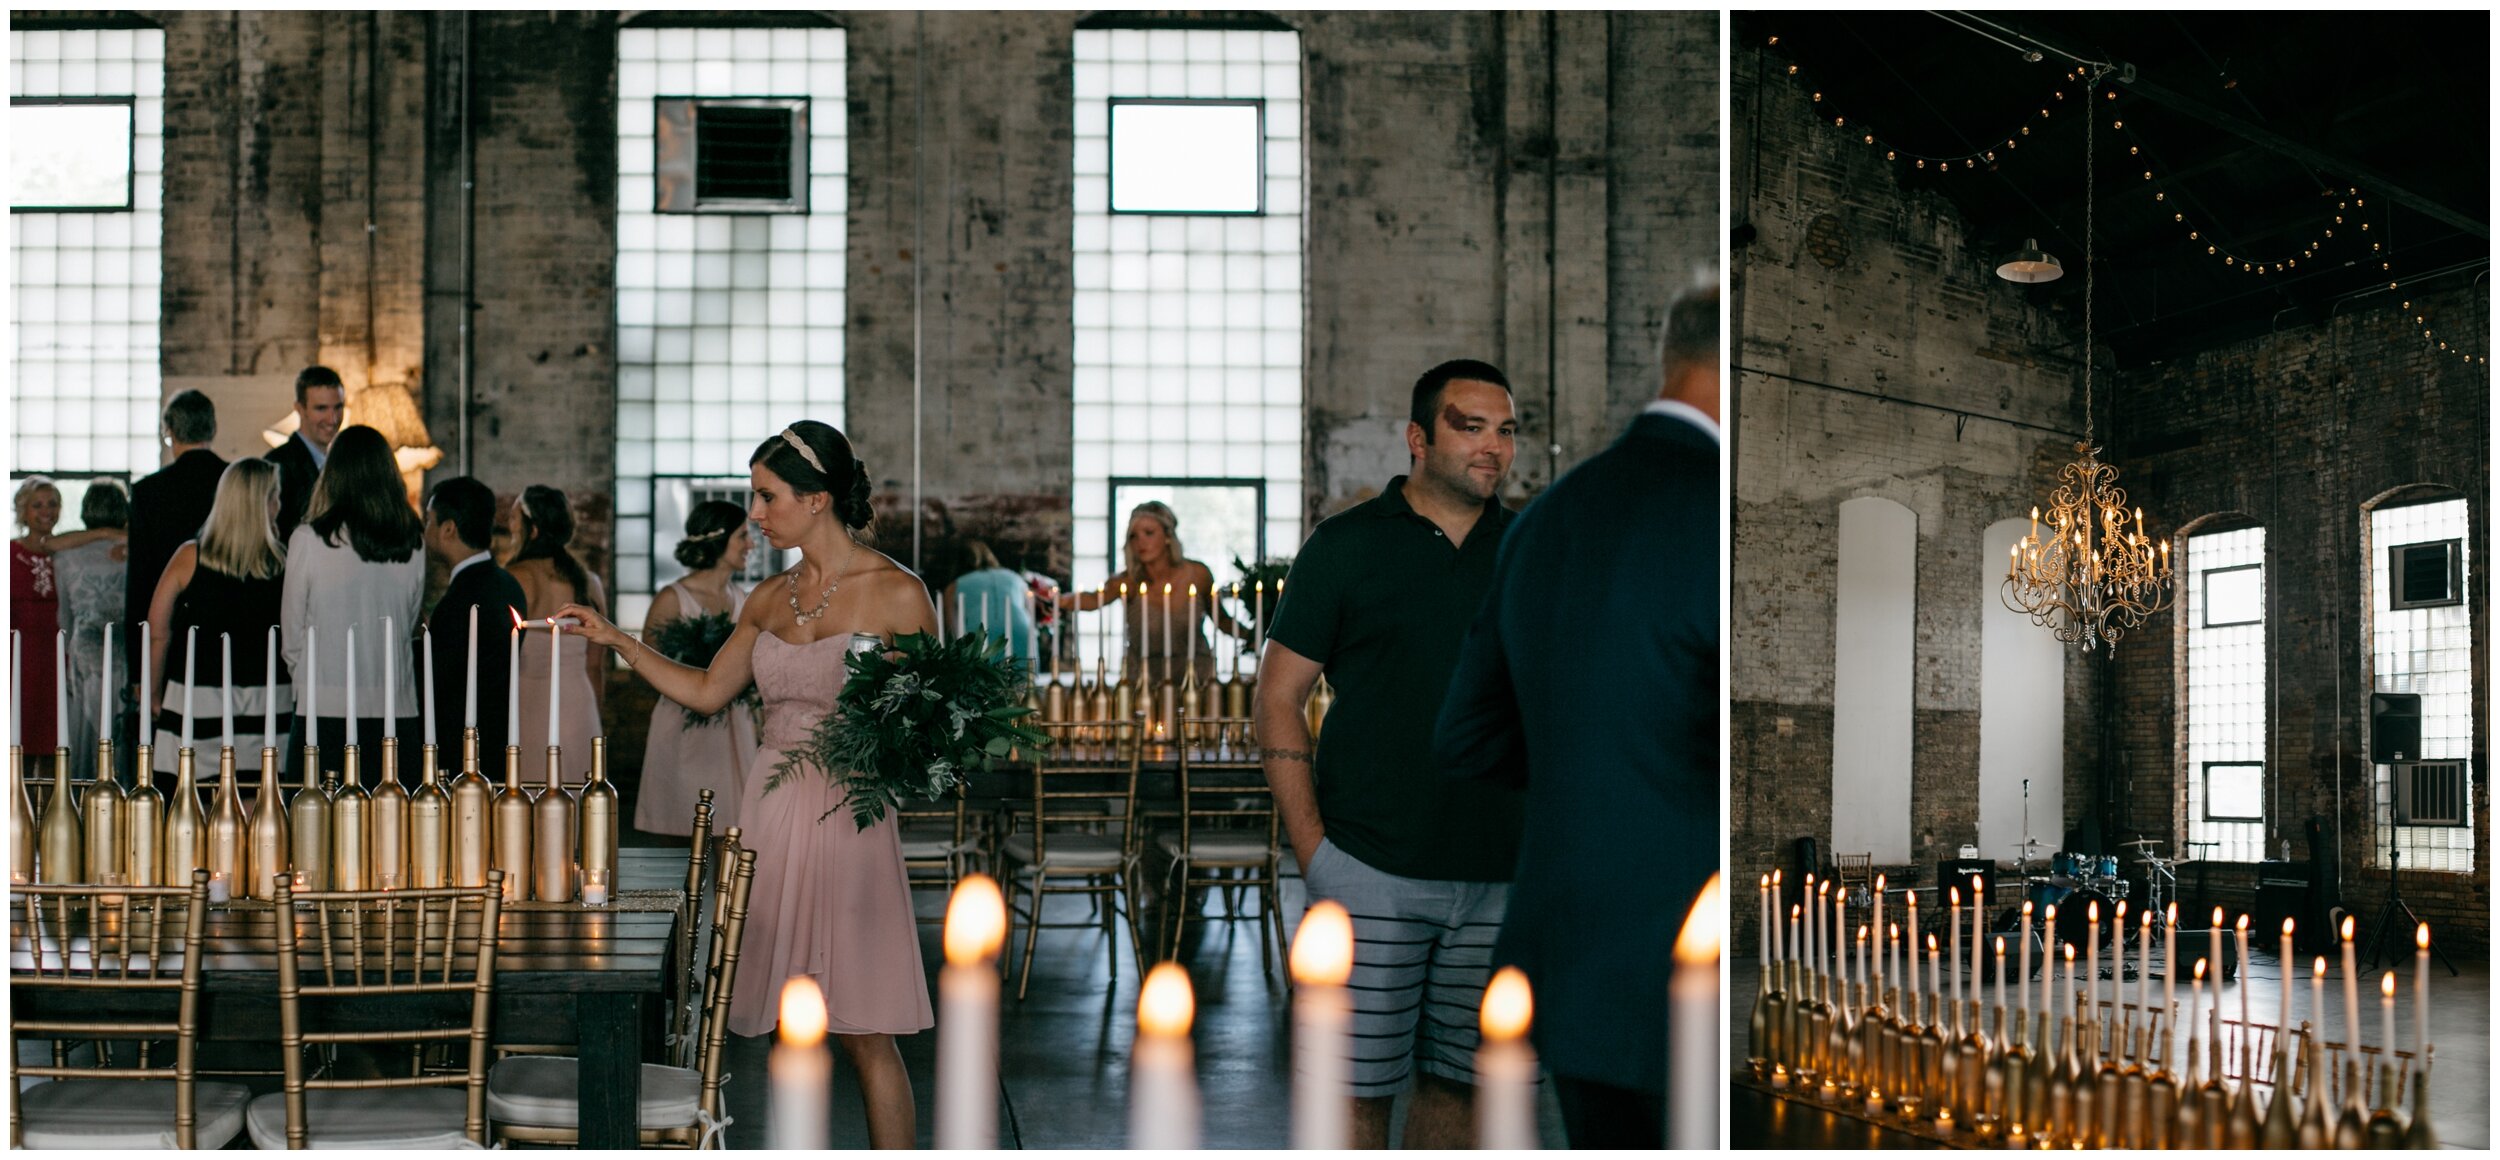 Candlelit wedding reception in industrial warehouse wedding venue at the Northern Pacific Center